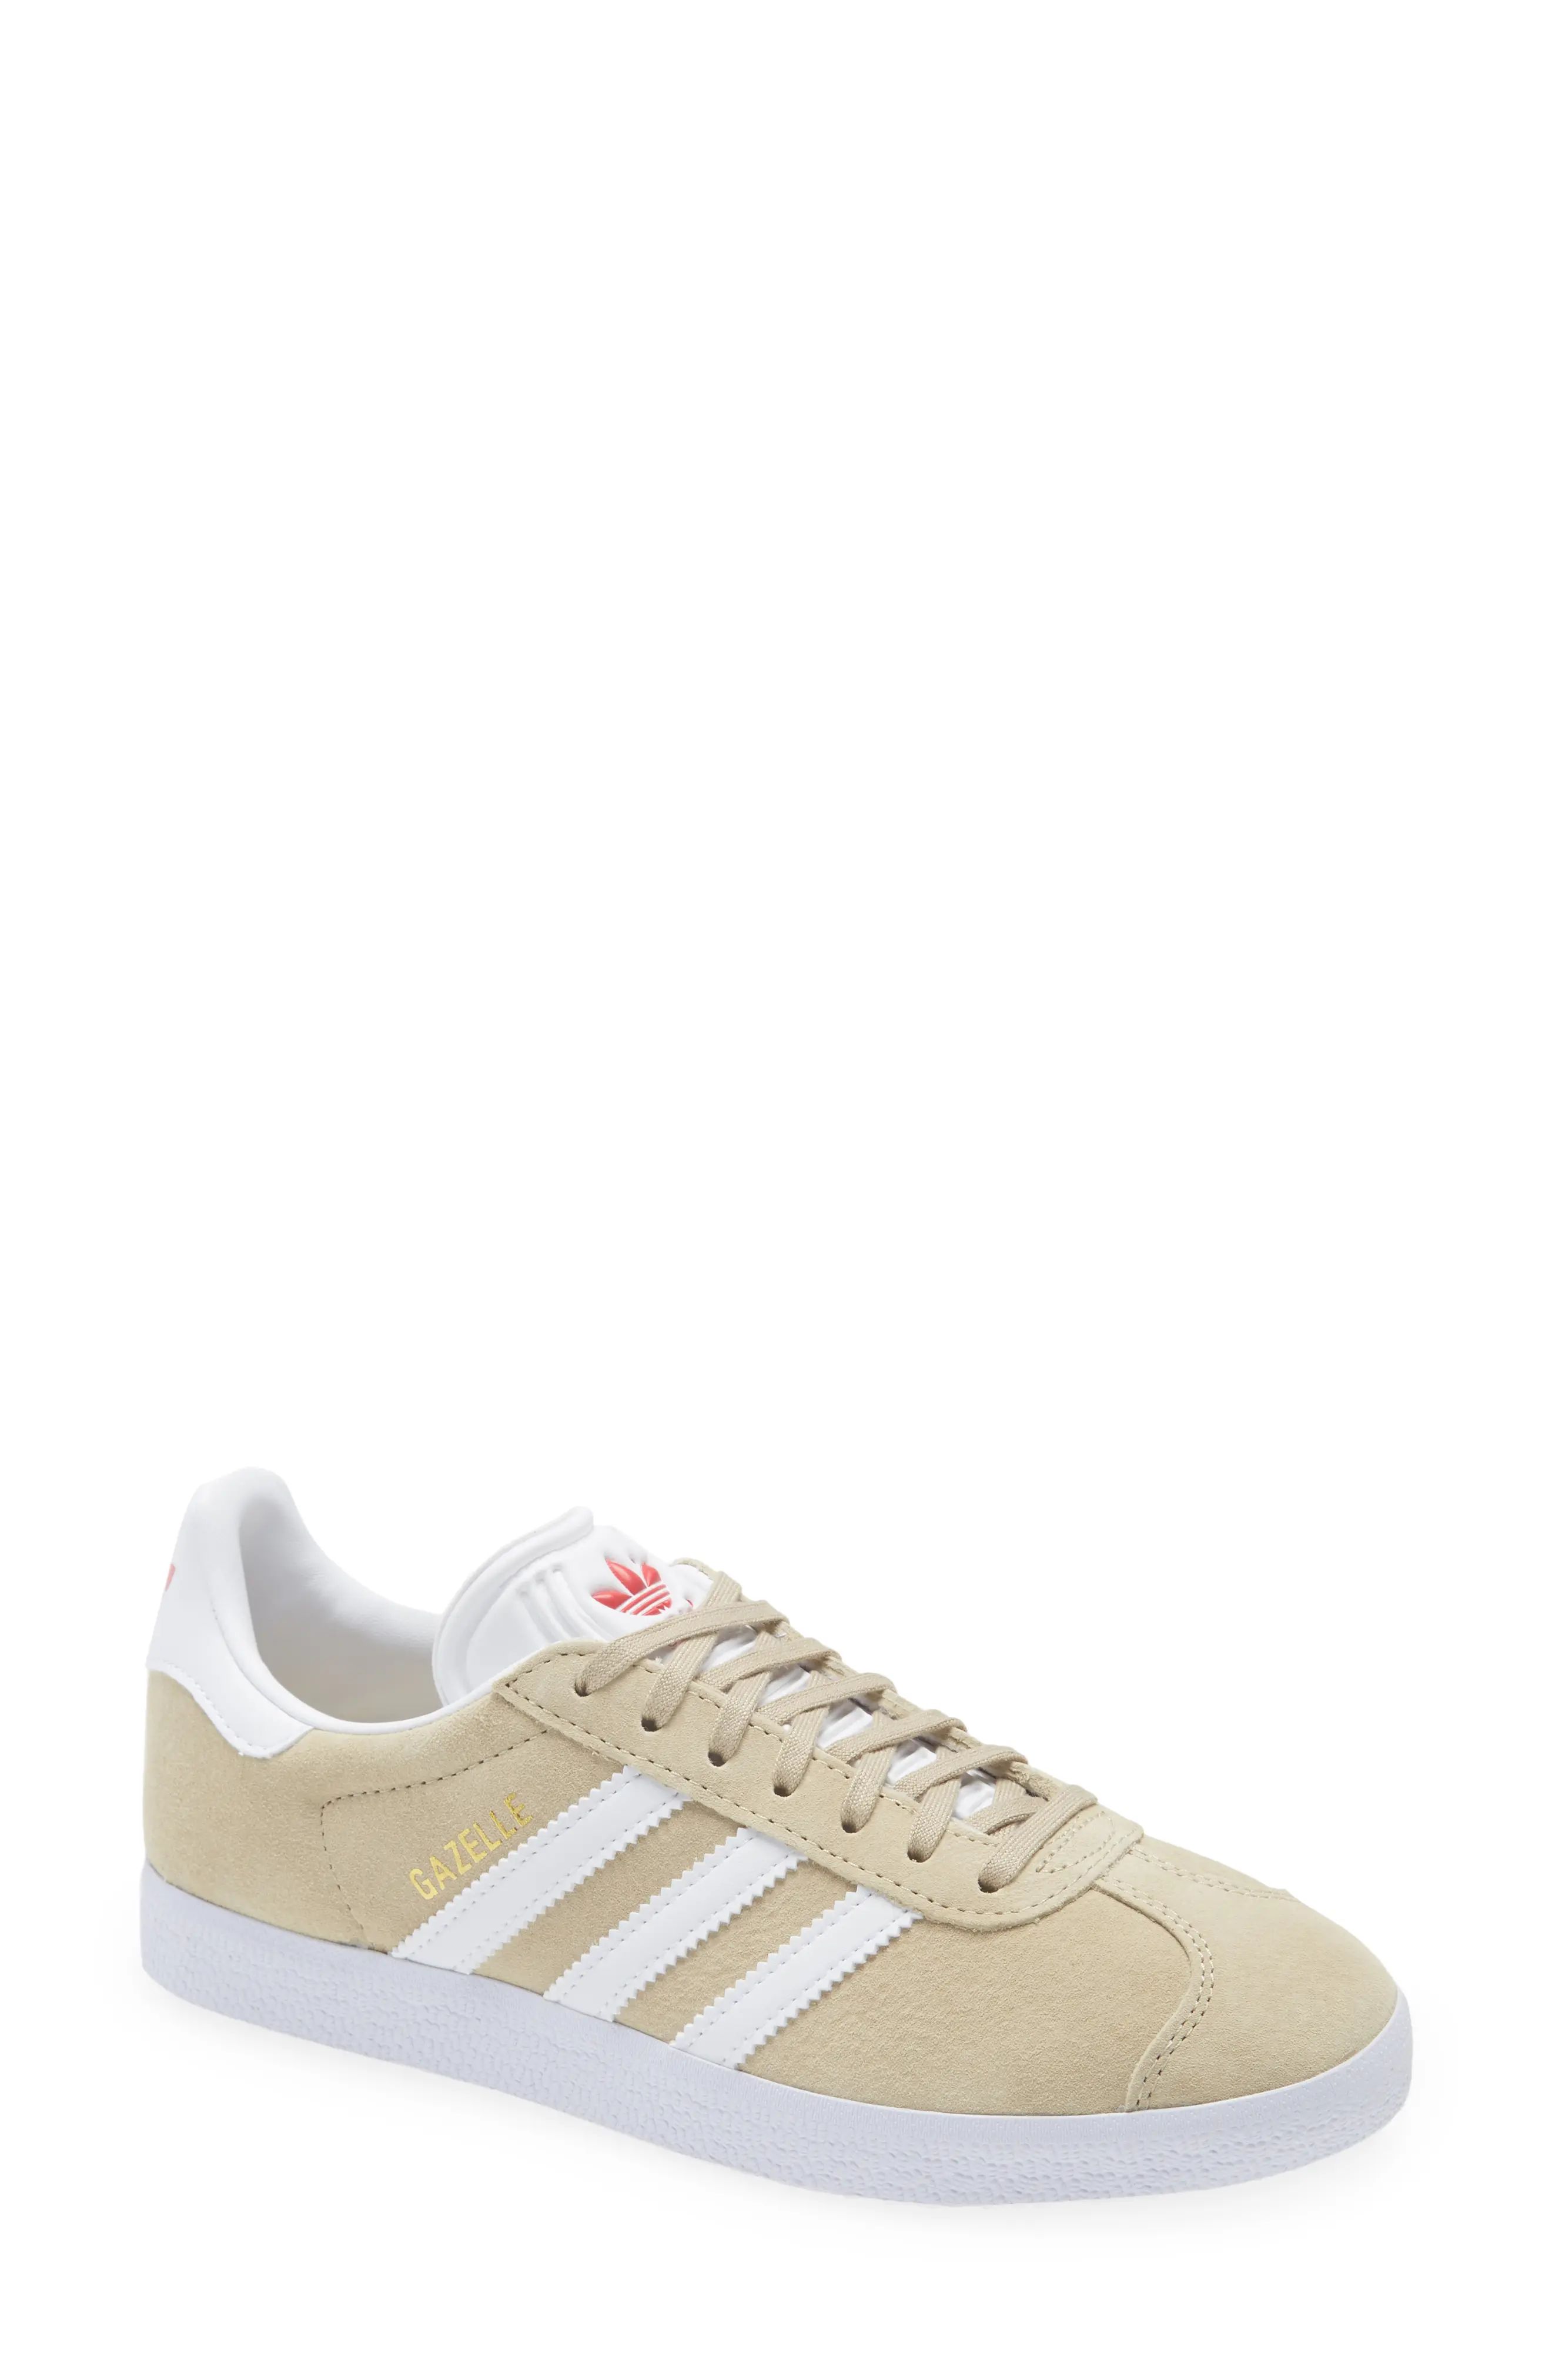 adidas Gazelle Sneaker in Savannah/White/Glory Red at Nordstrom, Size 5.5 | Nordstrom